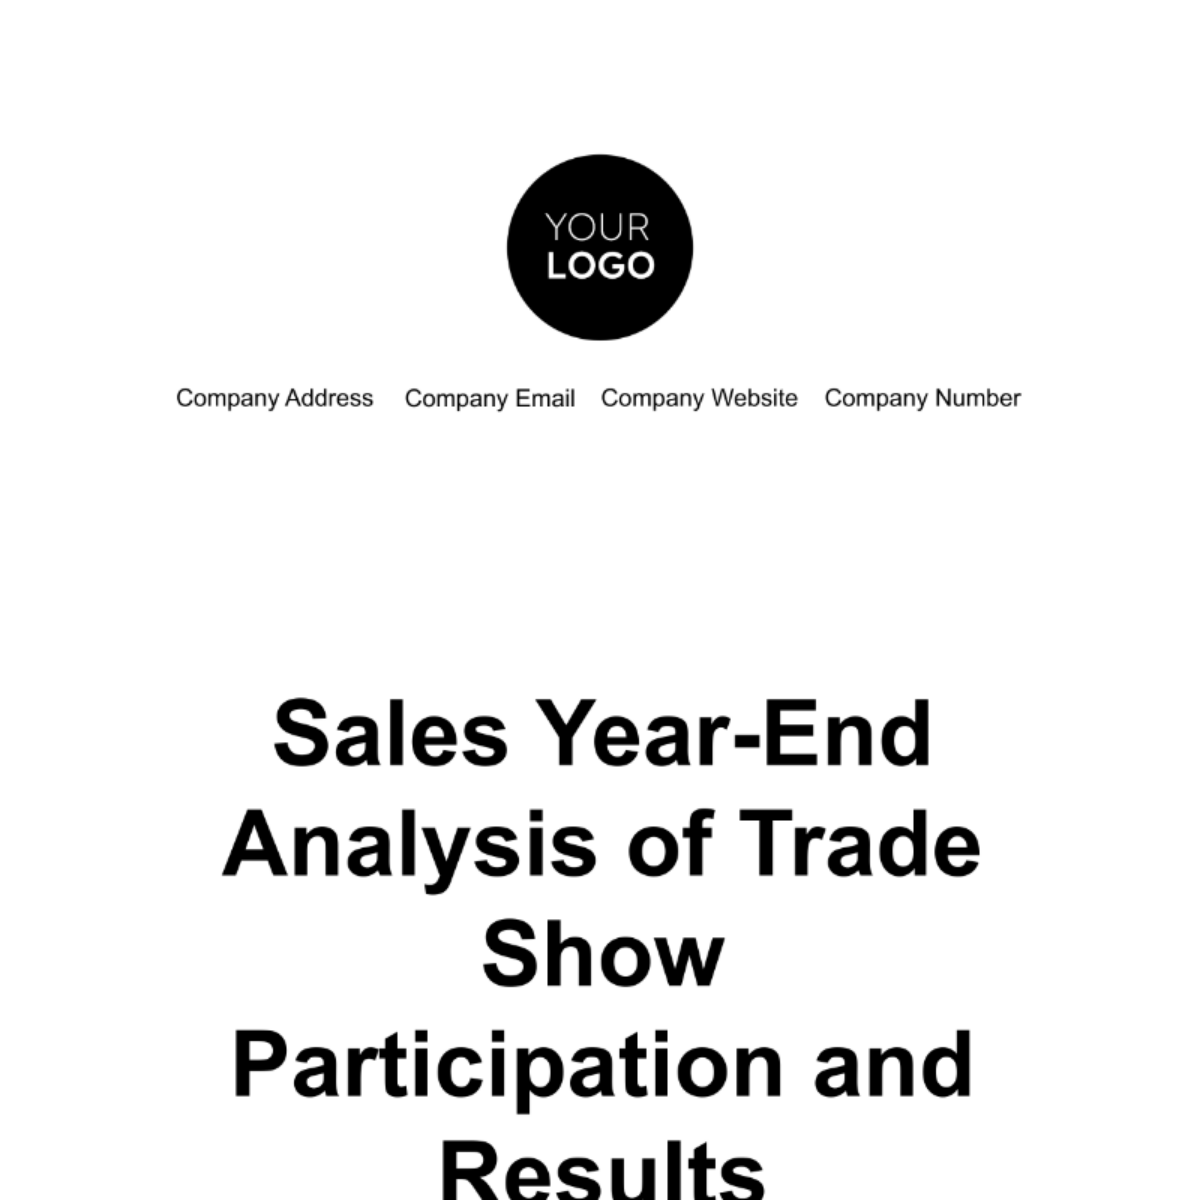 Sales Year-End Analysis of Trade Show Participation and Results Template